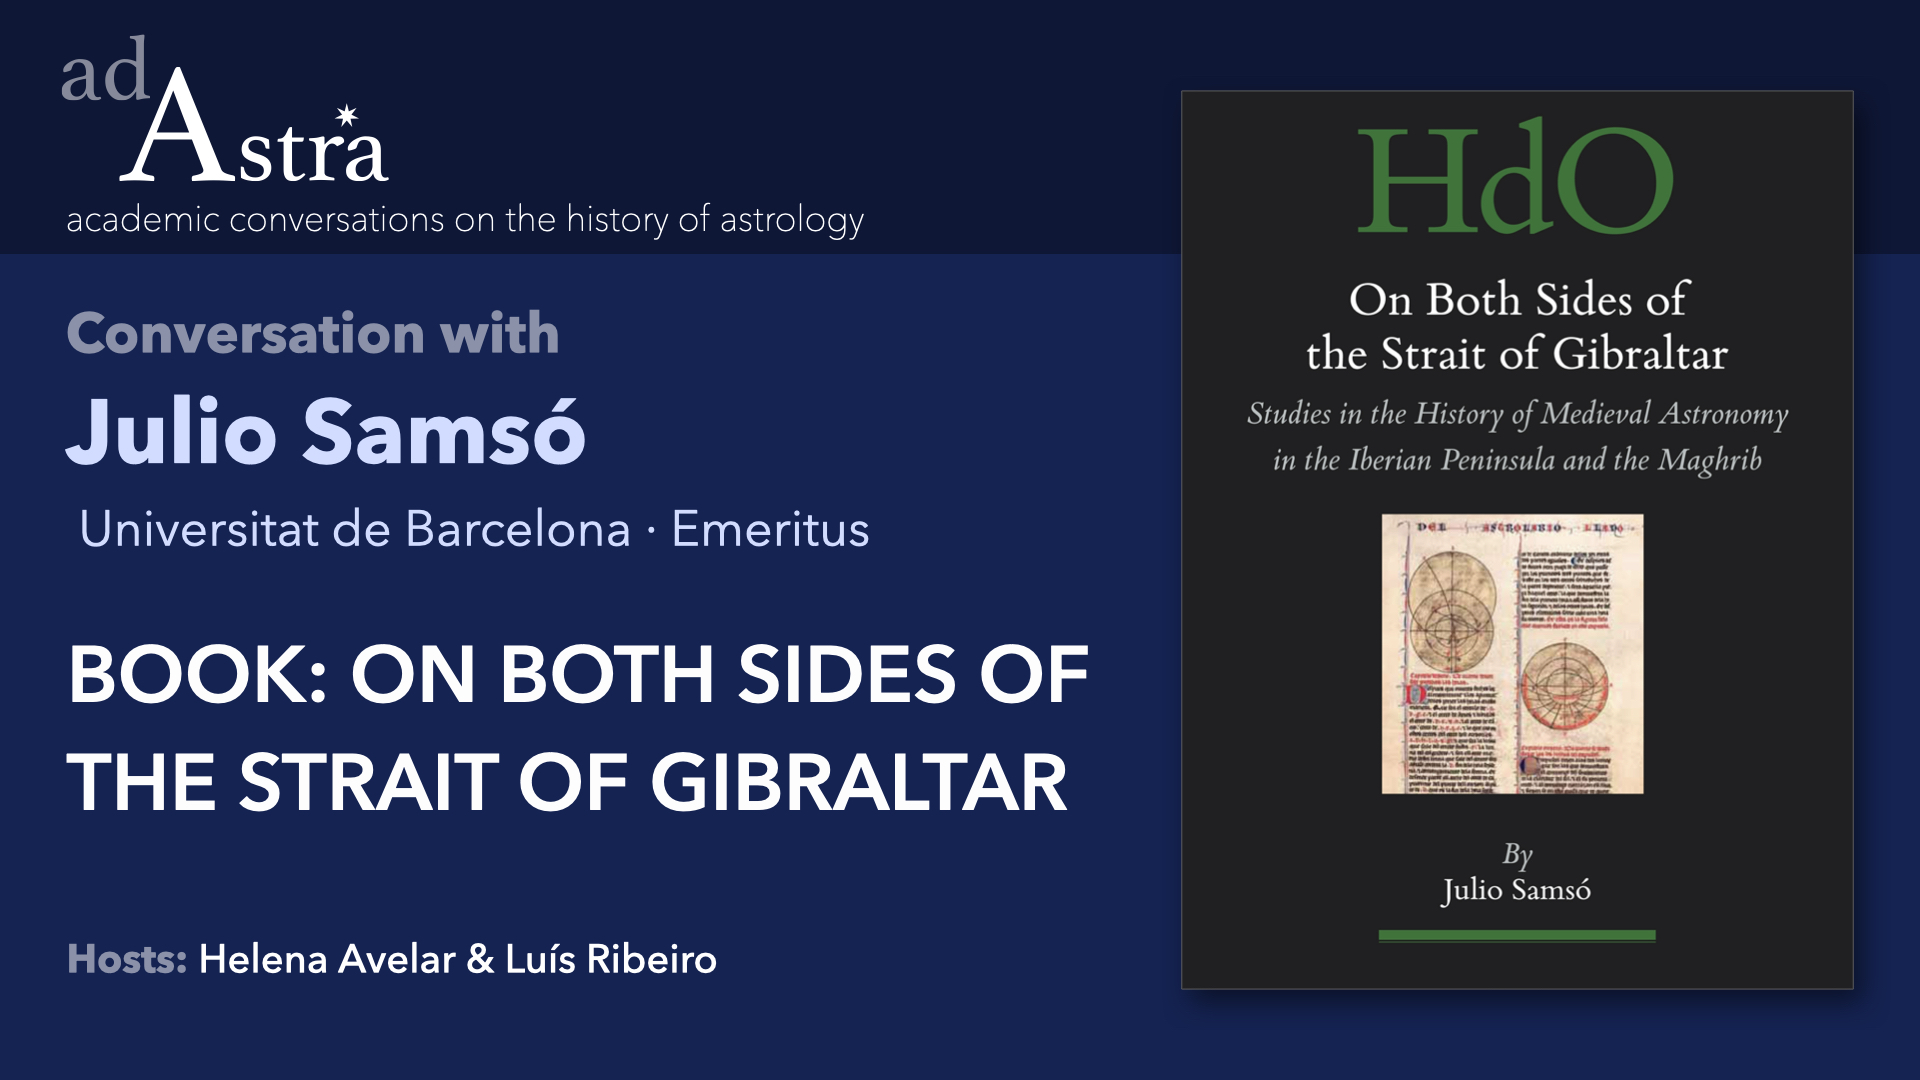 Book: On both sides of the Strait of Gibraltar by Julio Samsó